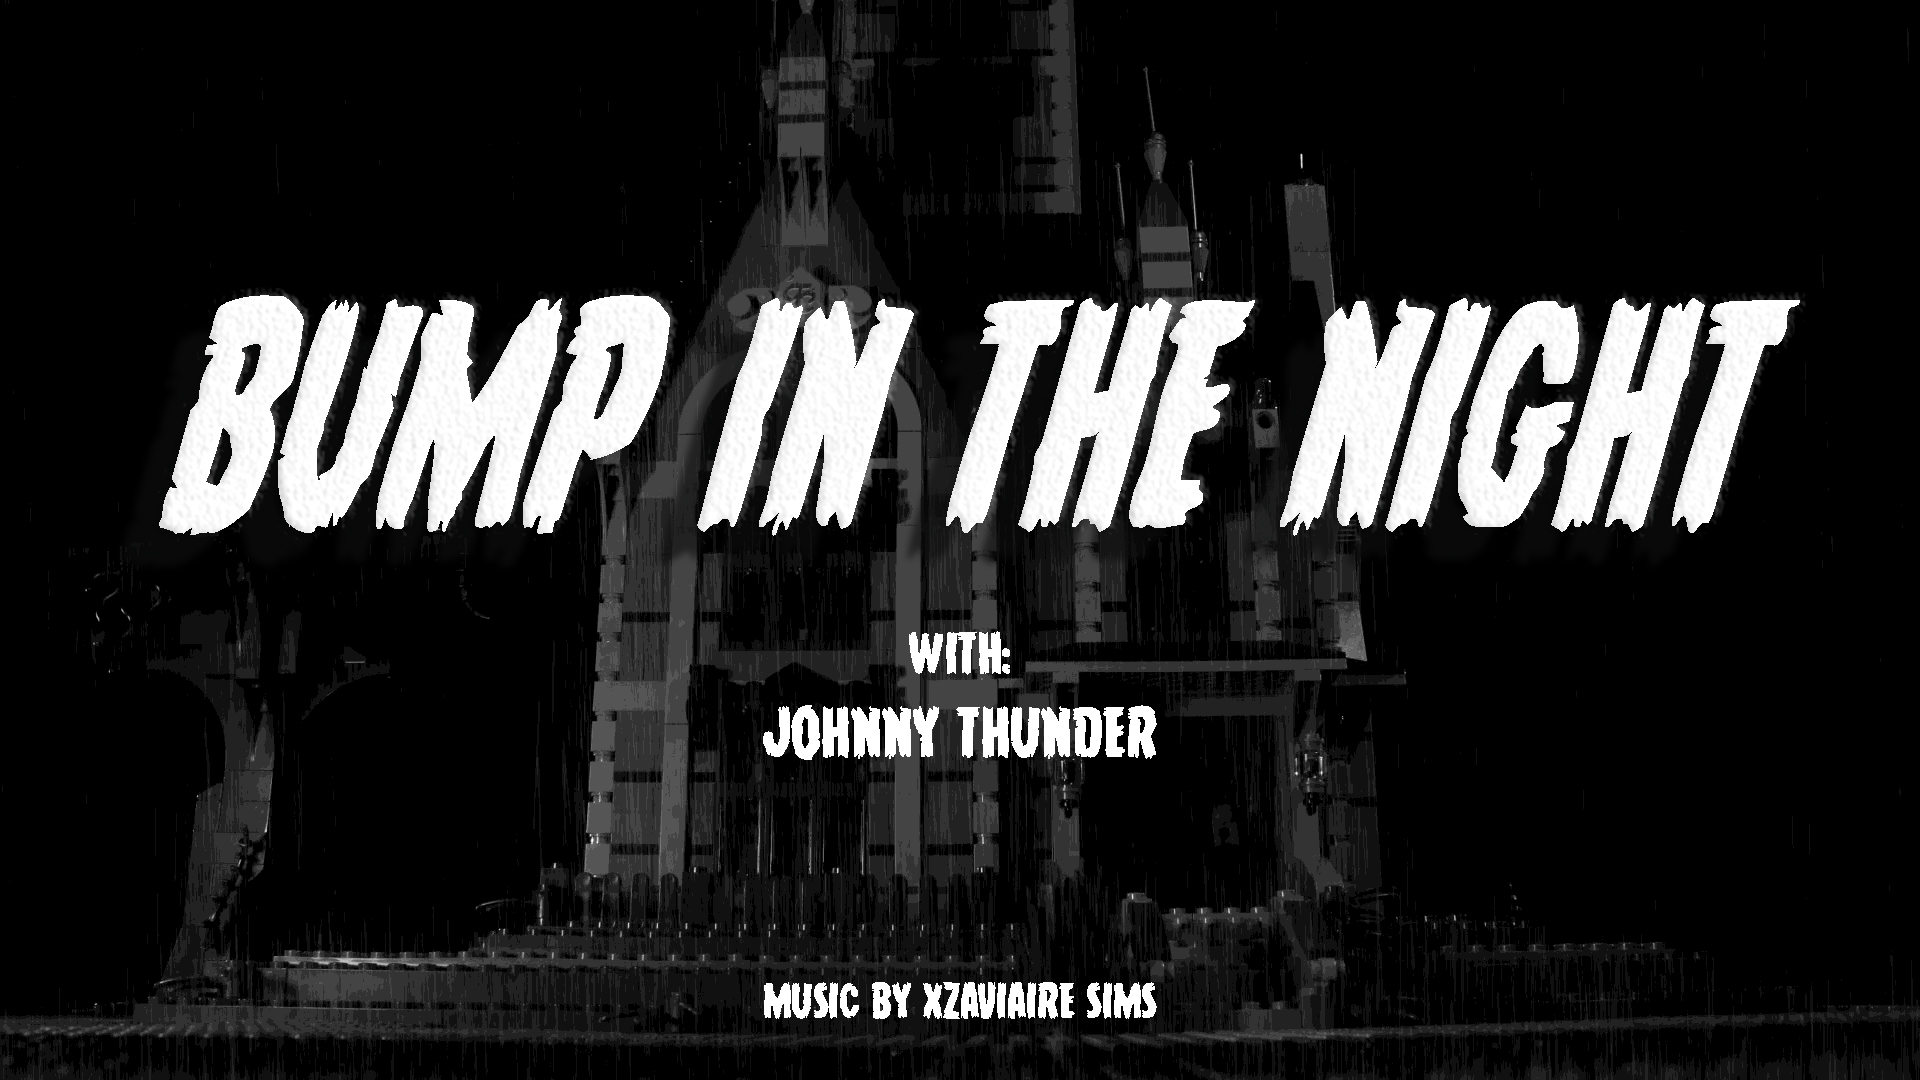 A Bump in the Night (Fright and Fear Entry)